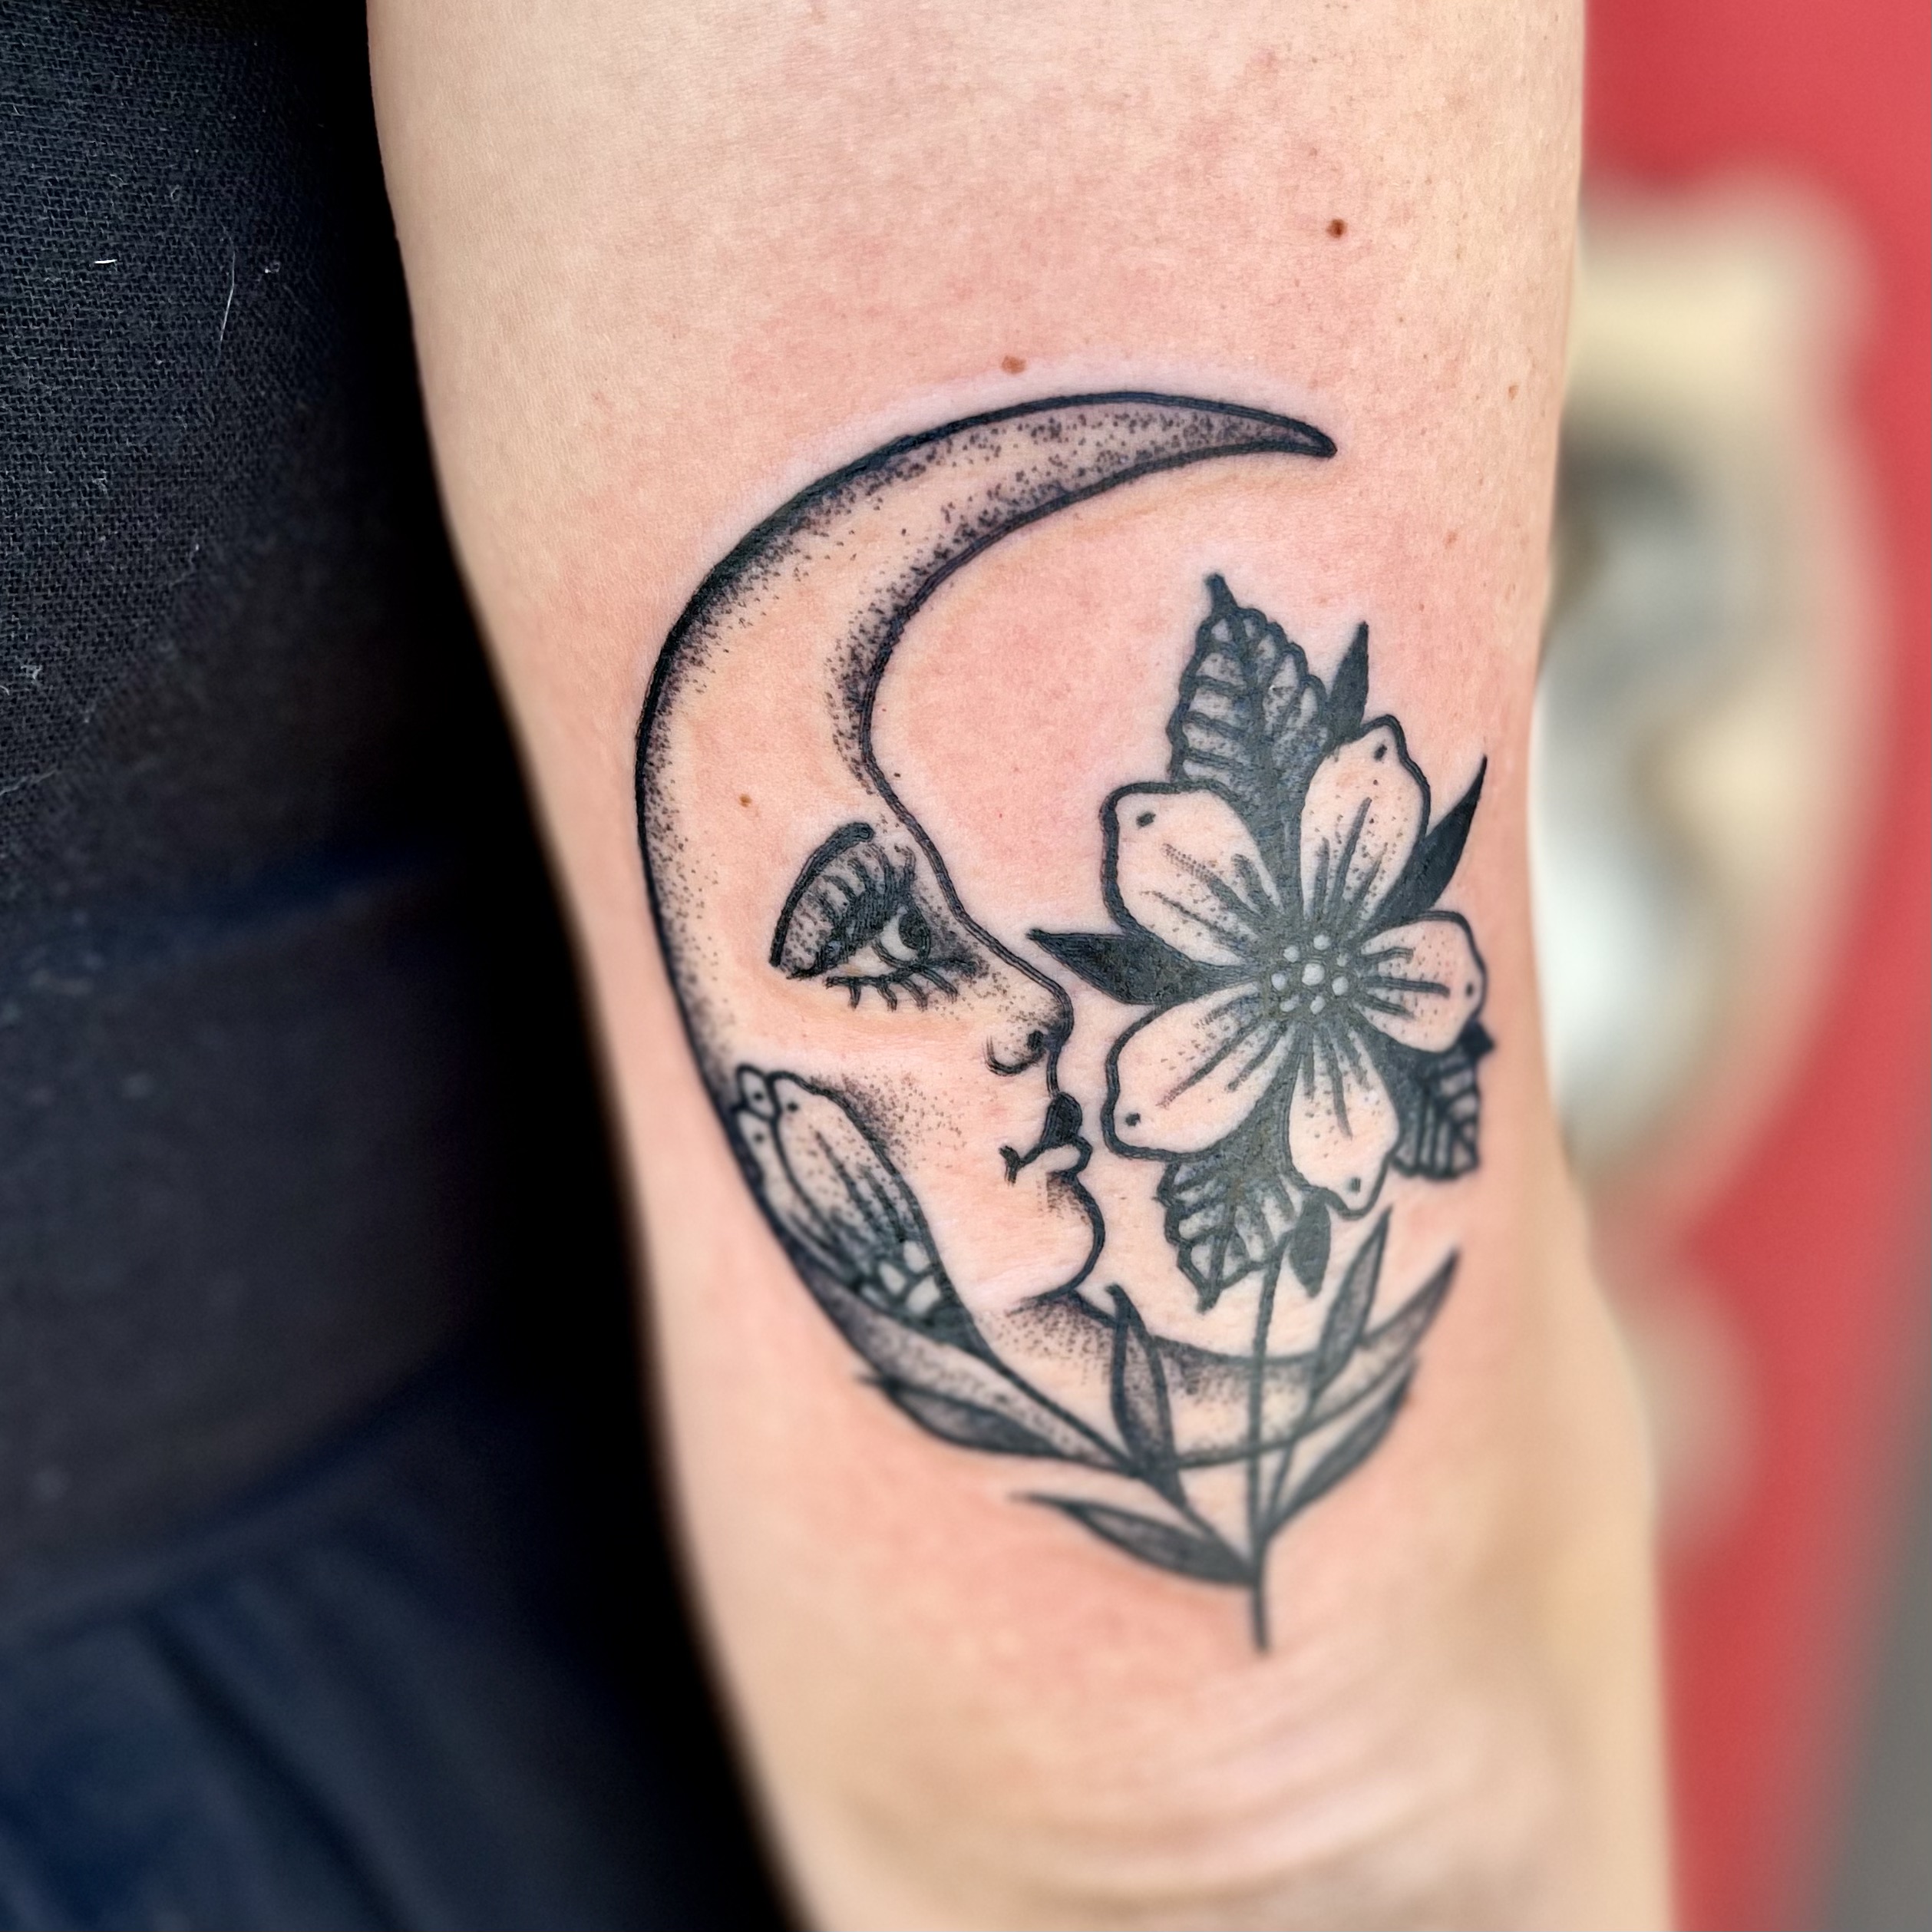 Tattoo of a moon on the back of a mans arm